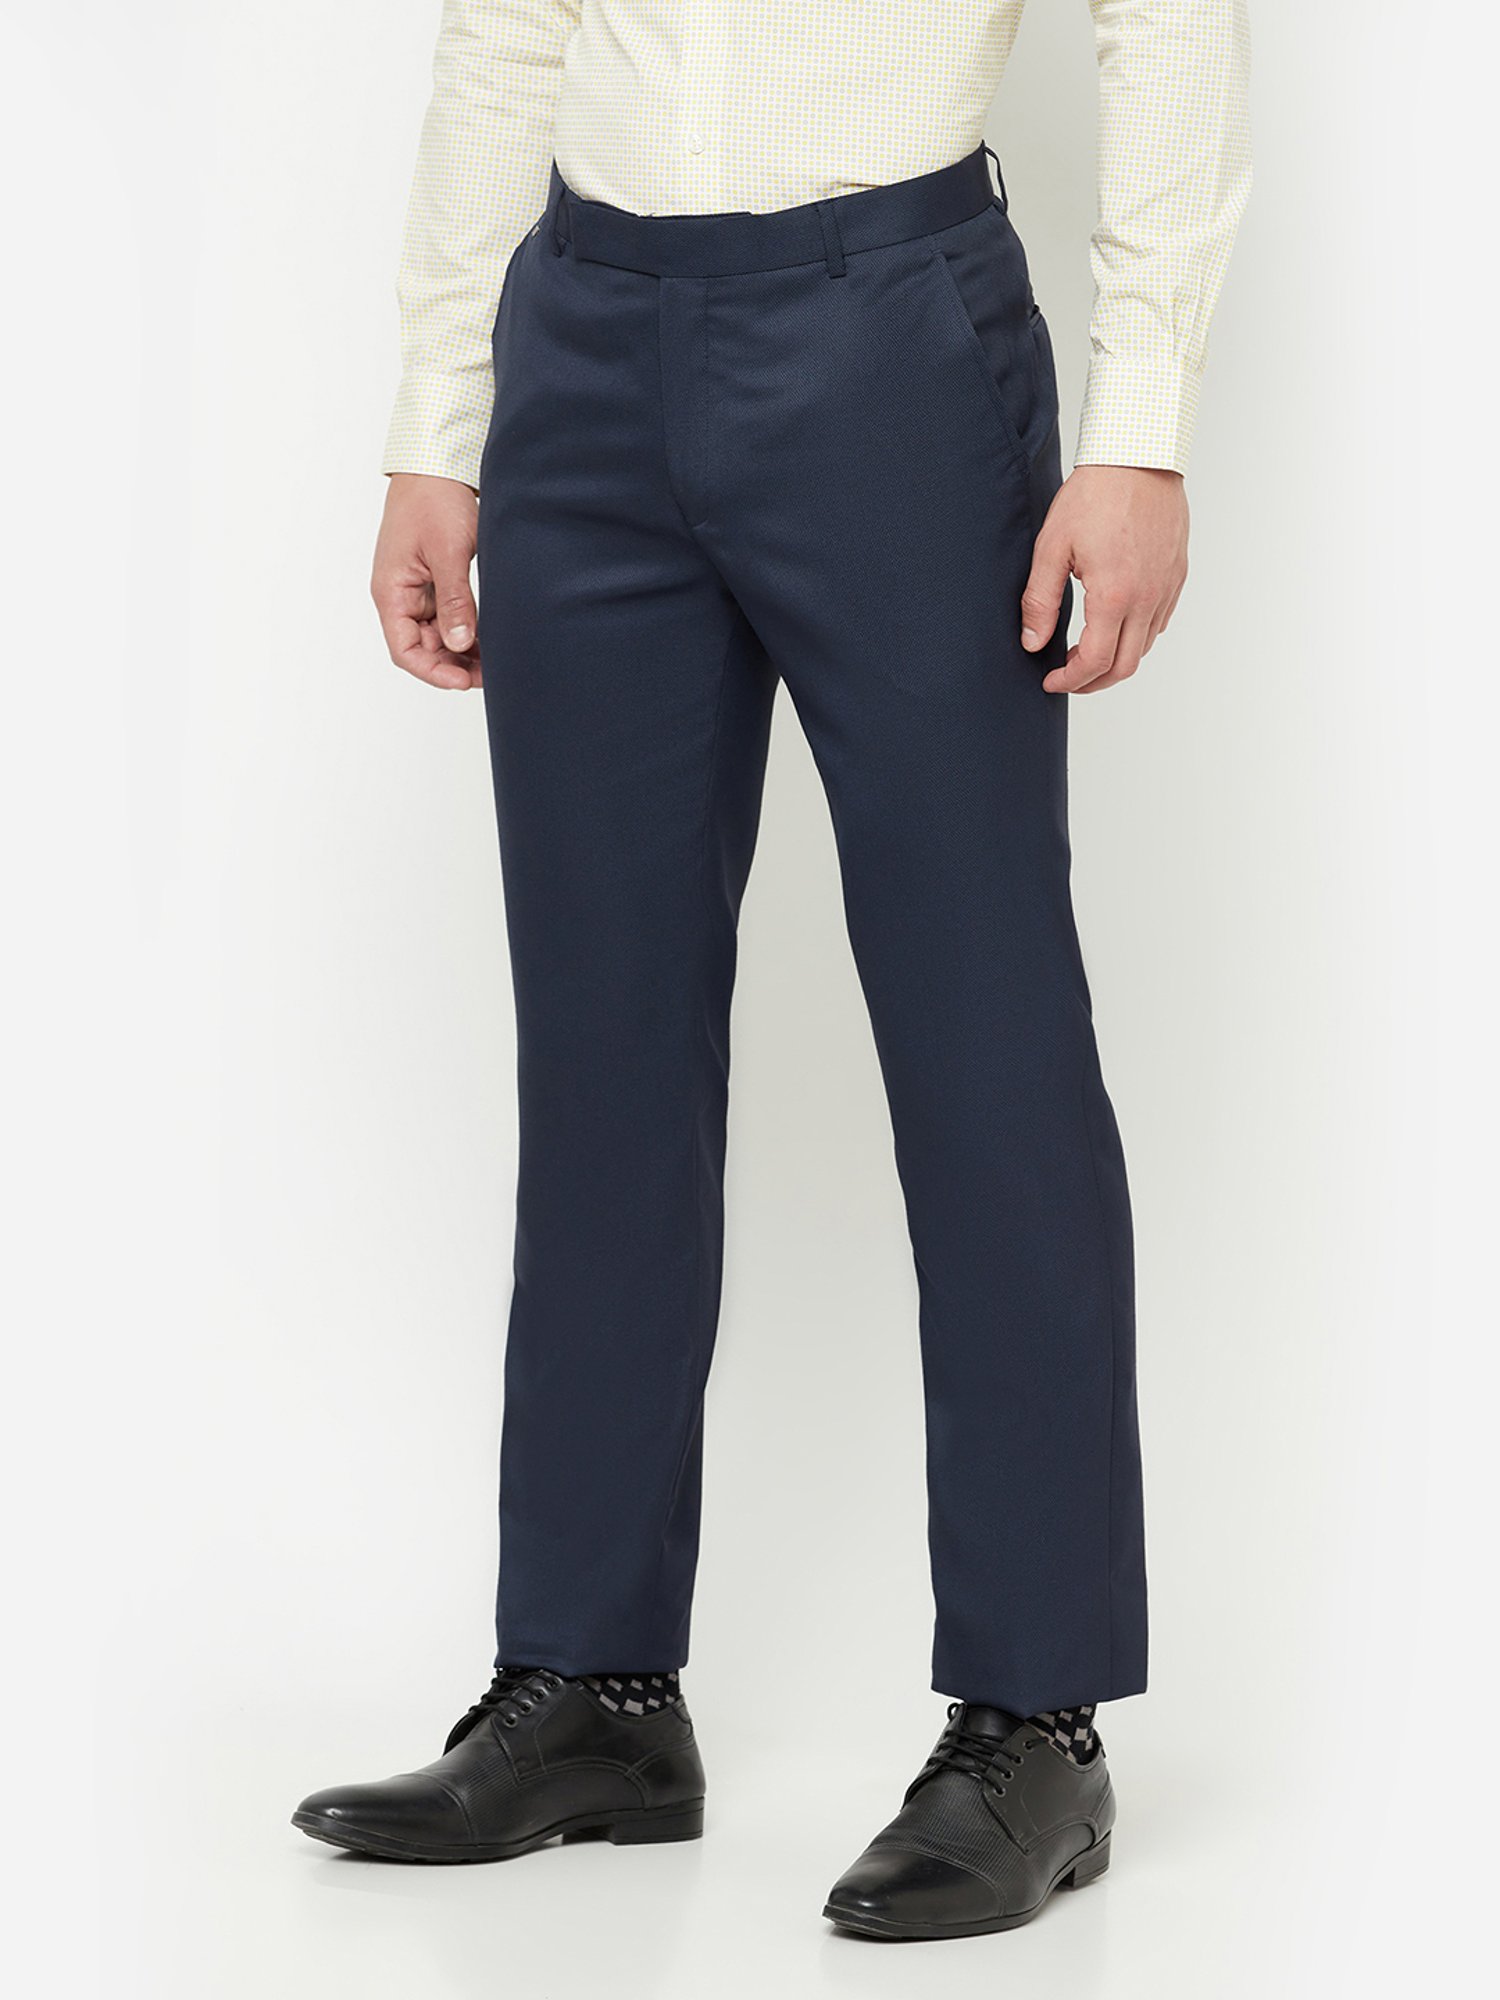 Buy RAYMOND Mens 5 Pocket Check Formal Trousers | Shoppers Stop